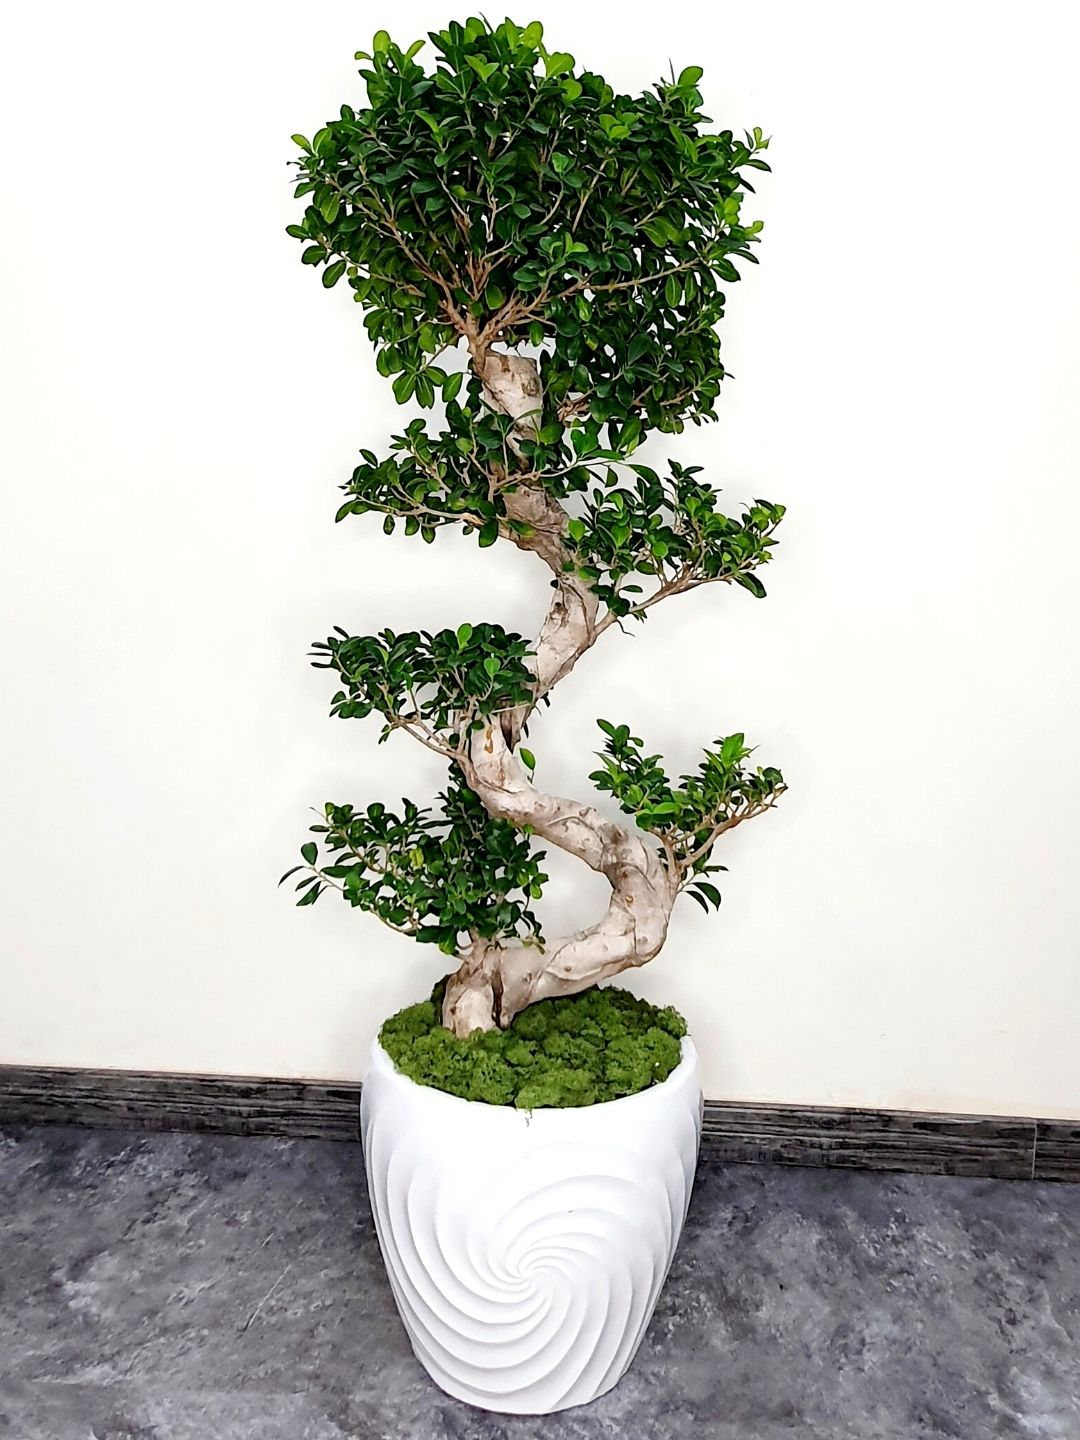 Potted XL Bonsai Tree - S Shape Planted in Fiber White Shallow Pot with Pebbles Topping